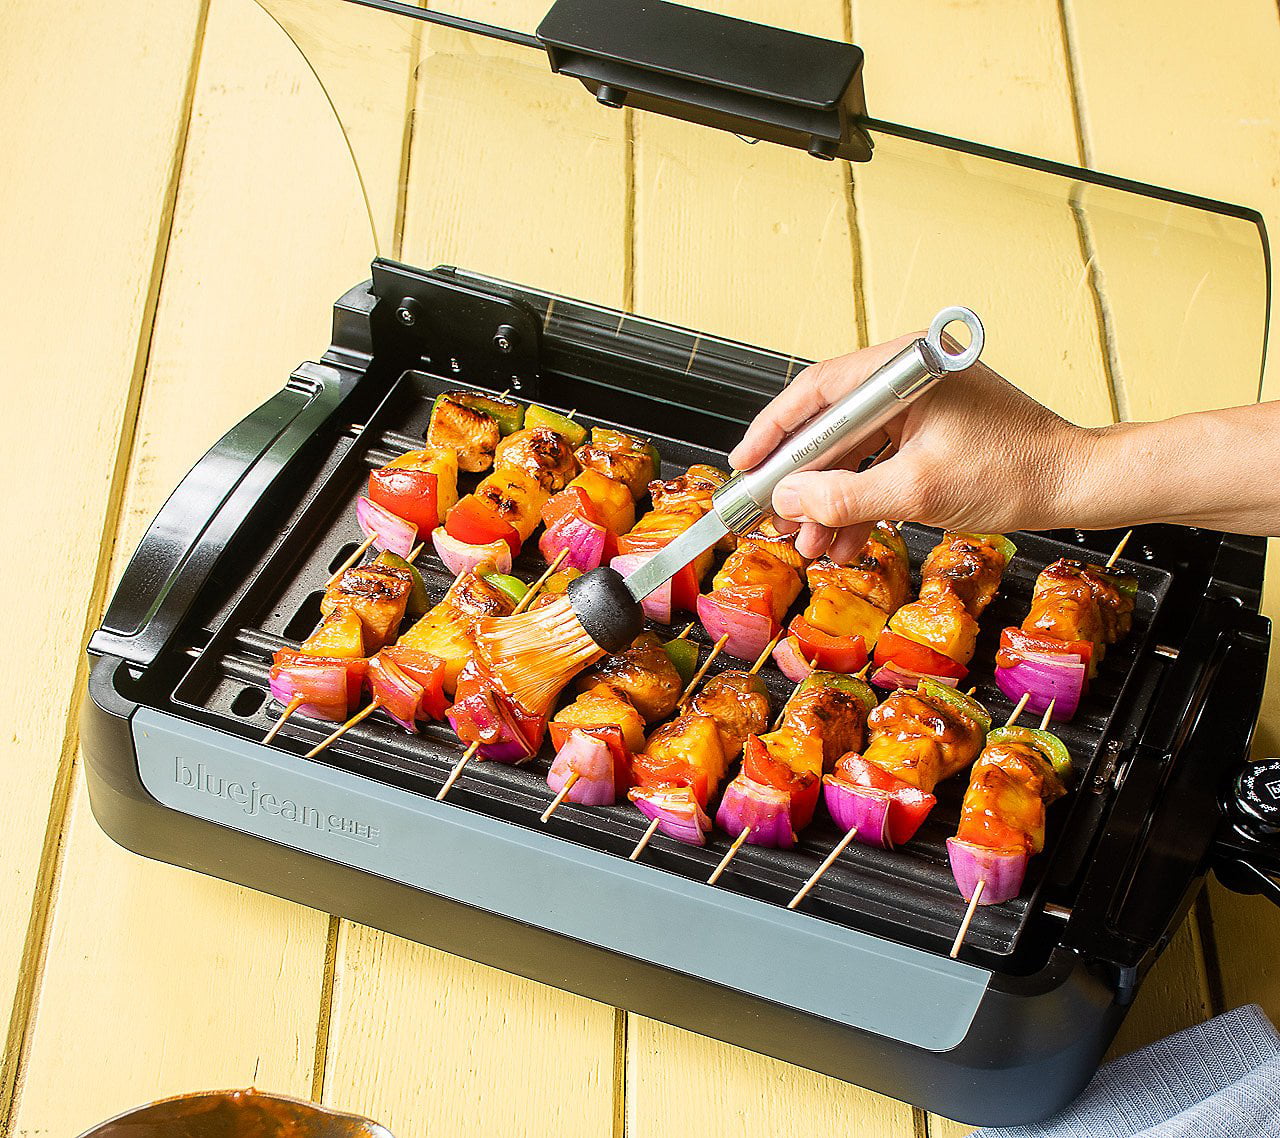 MegaChef Reversible Indoor Grill and Griddle with Removable Glass Lid